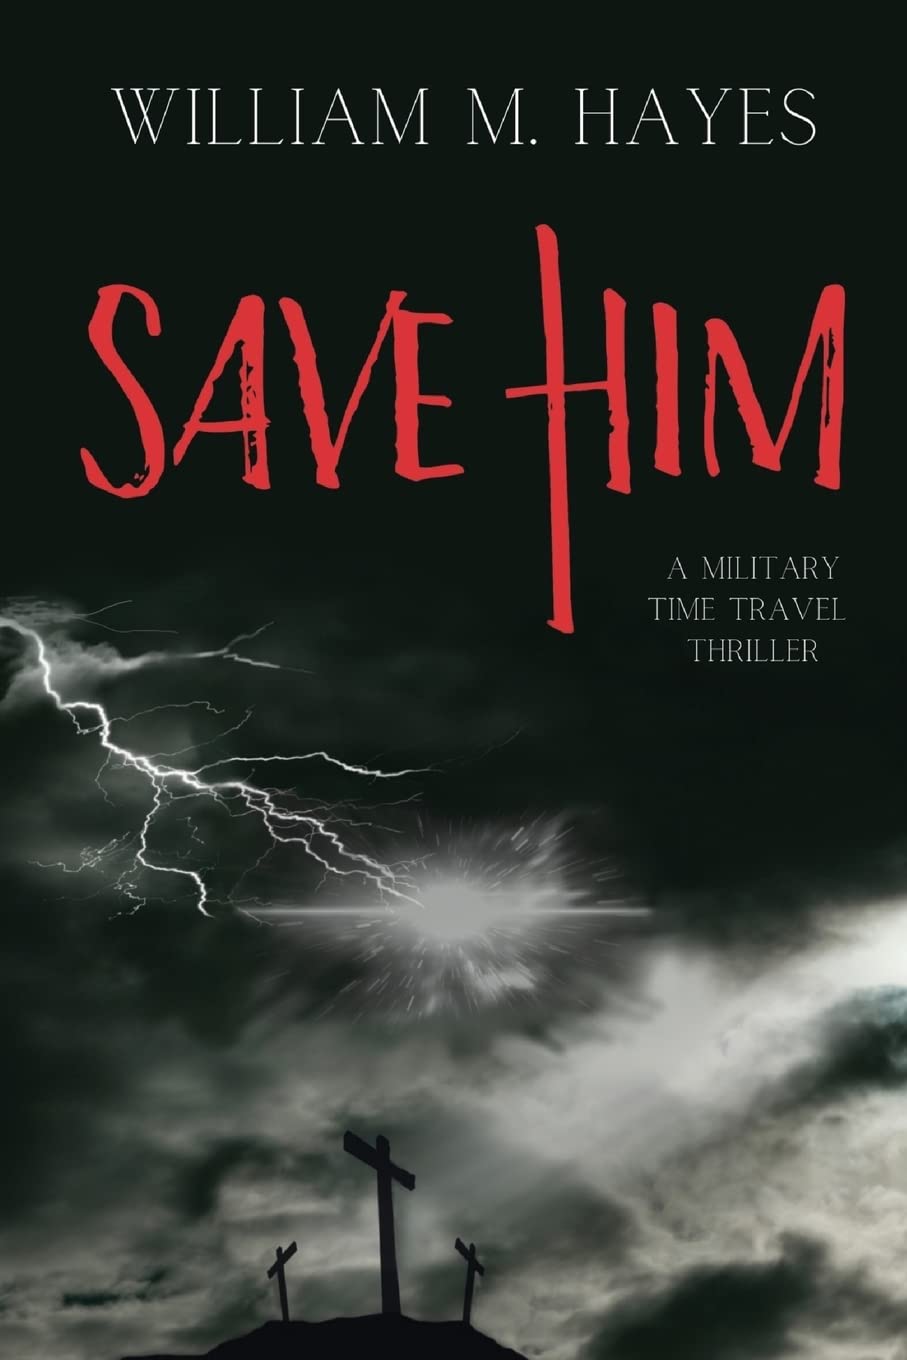 Author William M. Hayes’s Multi-award-winning Time-Travel Thriller ‘Save Him’ Continues to Impress Readers and Rack Up Book Awards